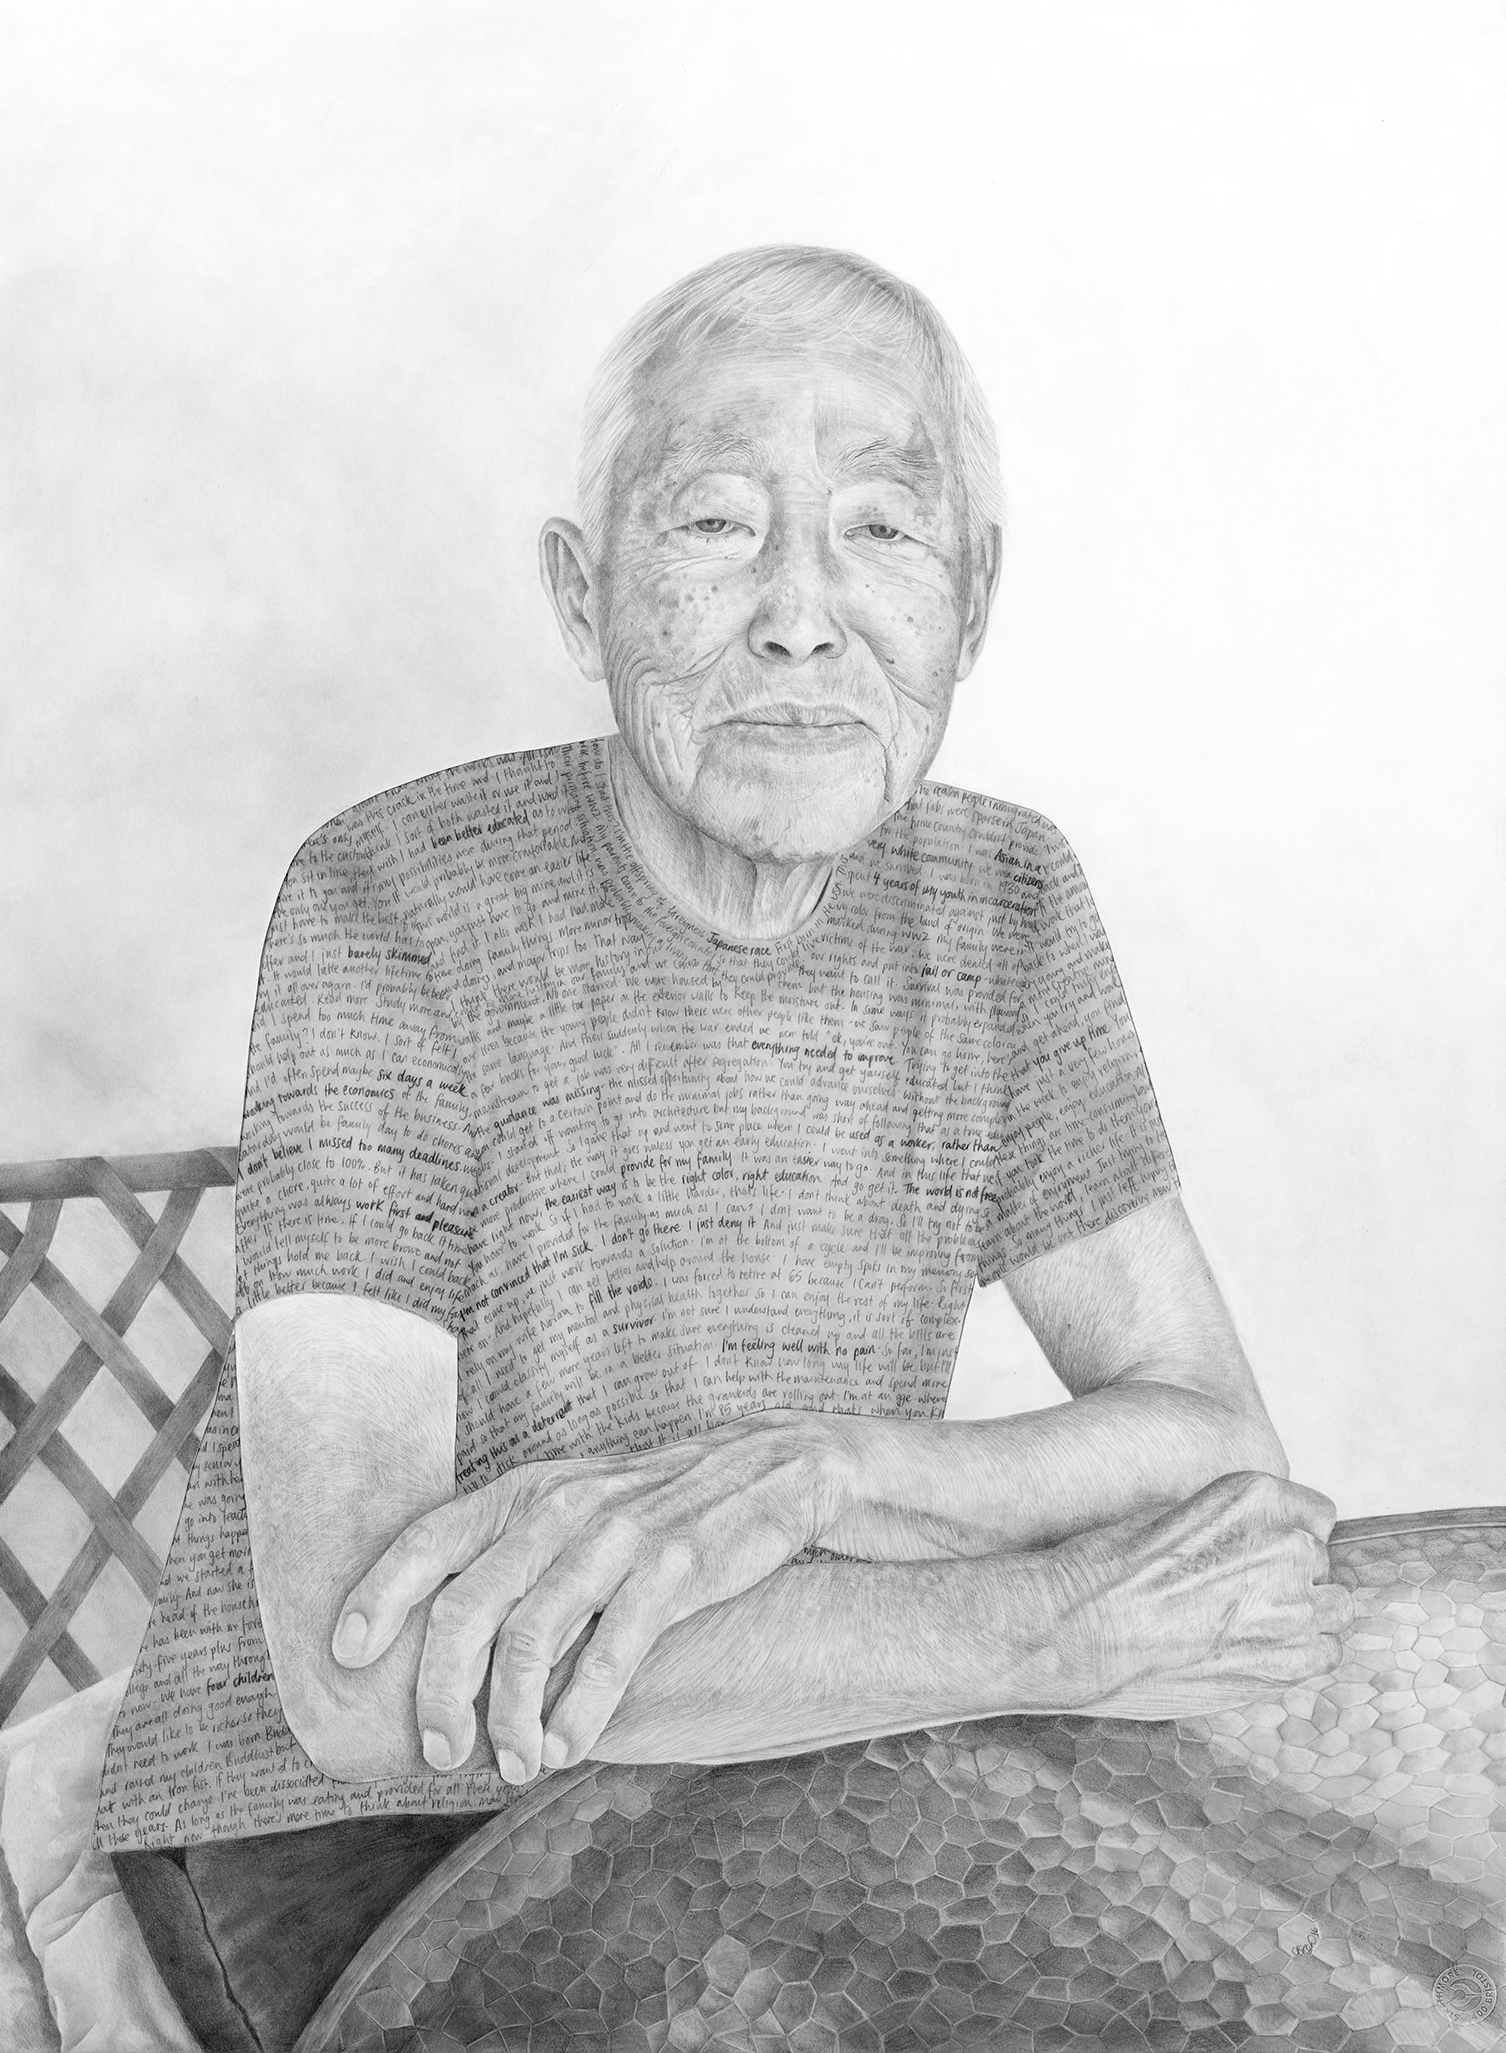 Osamu - Pencil on drawing and tissue papers - 30" x 22" - 2016